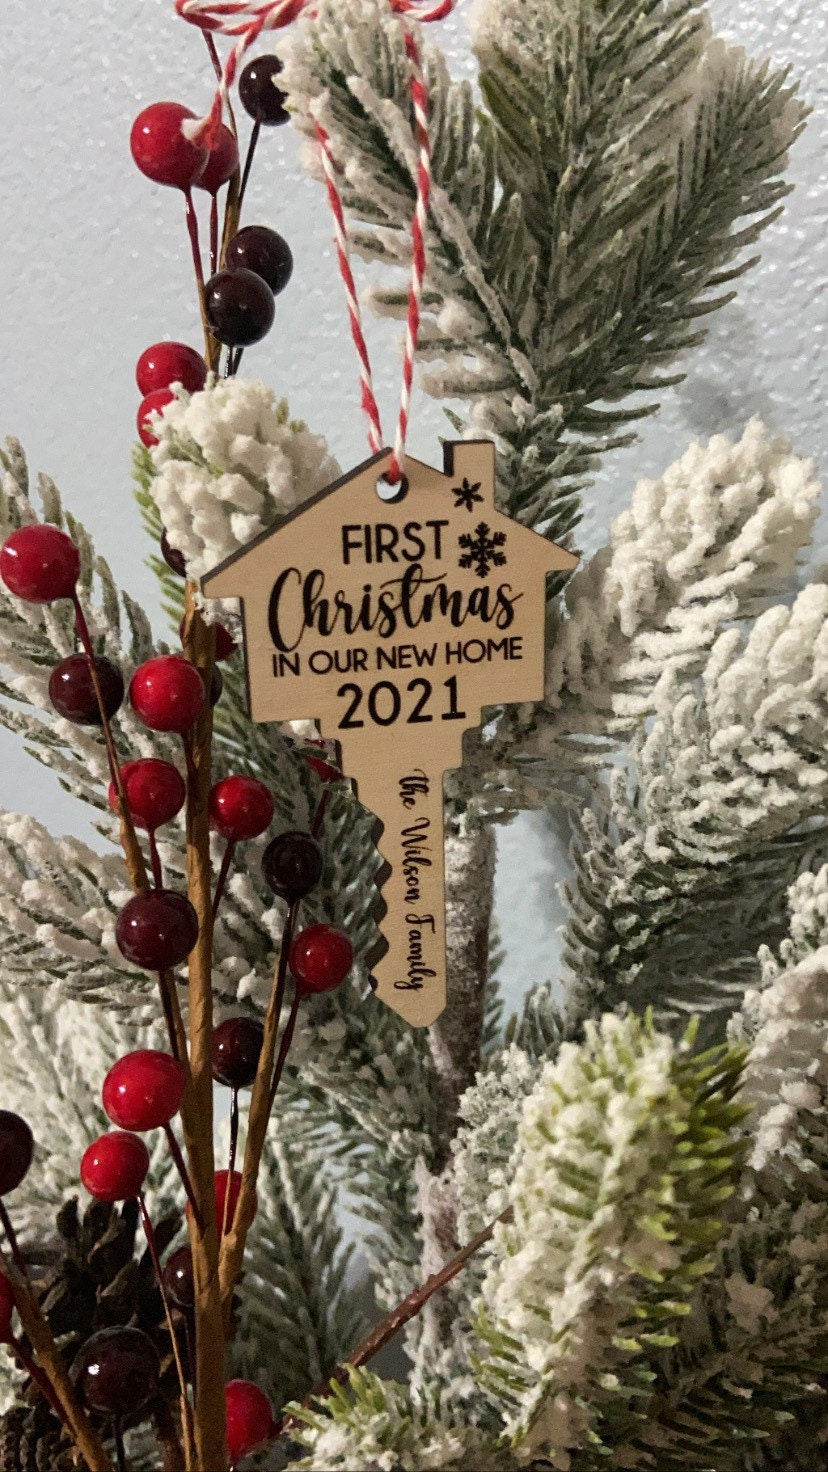 Our First Home Ornament, New House ornament, First Christmas in our New Home, New Home Gifts, New Home Keepsake